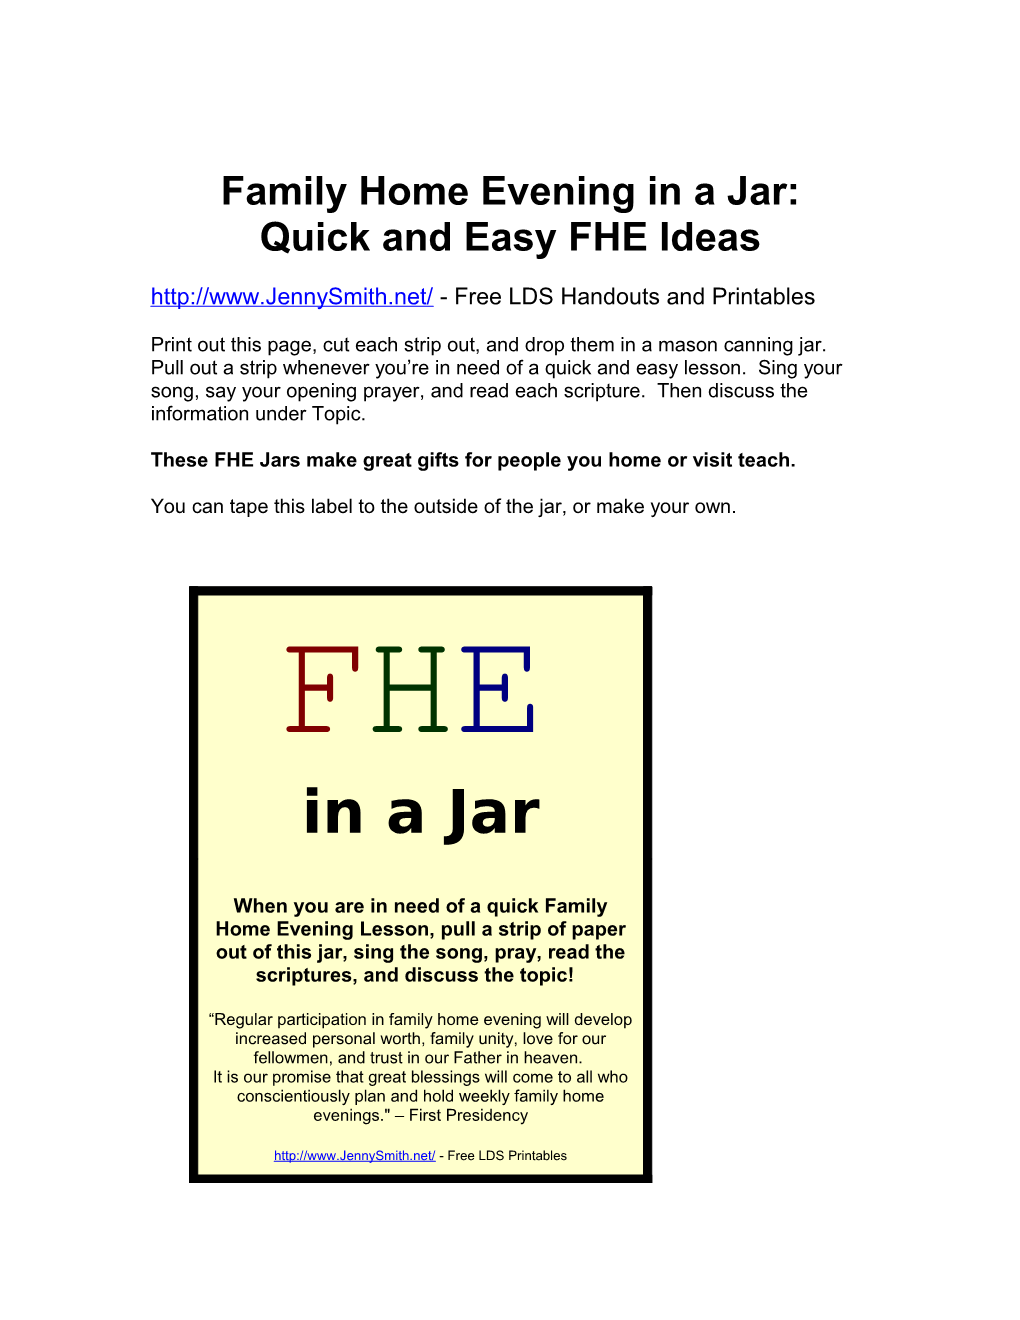 Family Home Evening in a Jar: Quick and Easy FHE Ideas